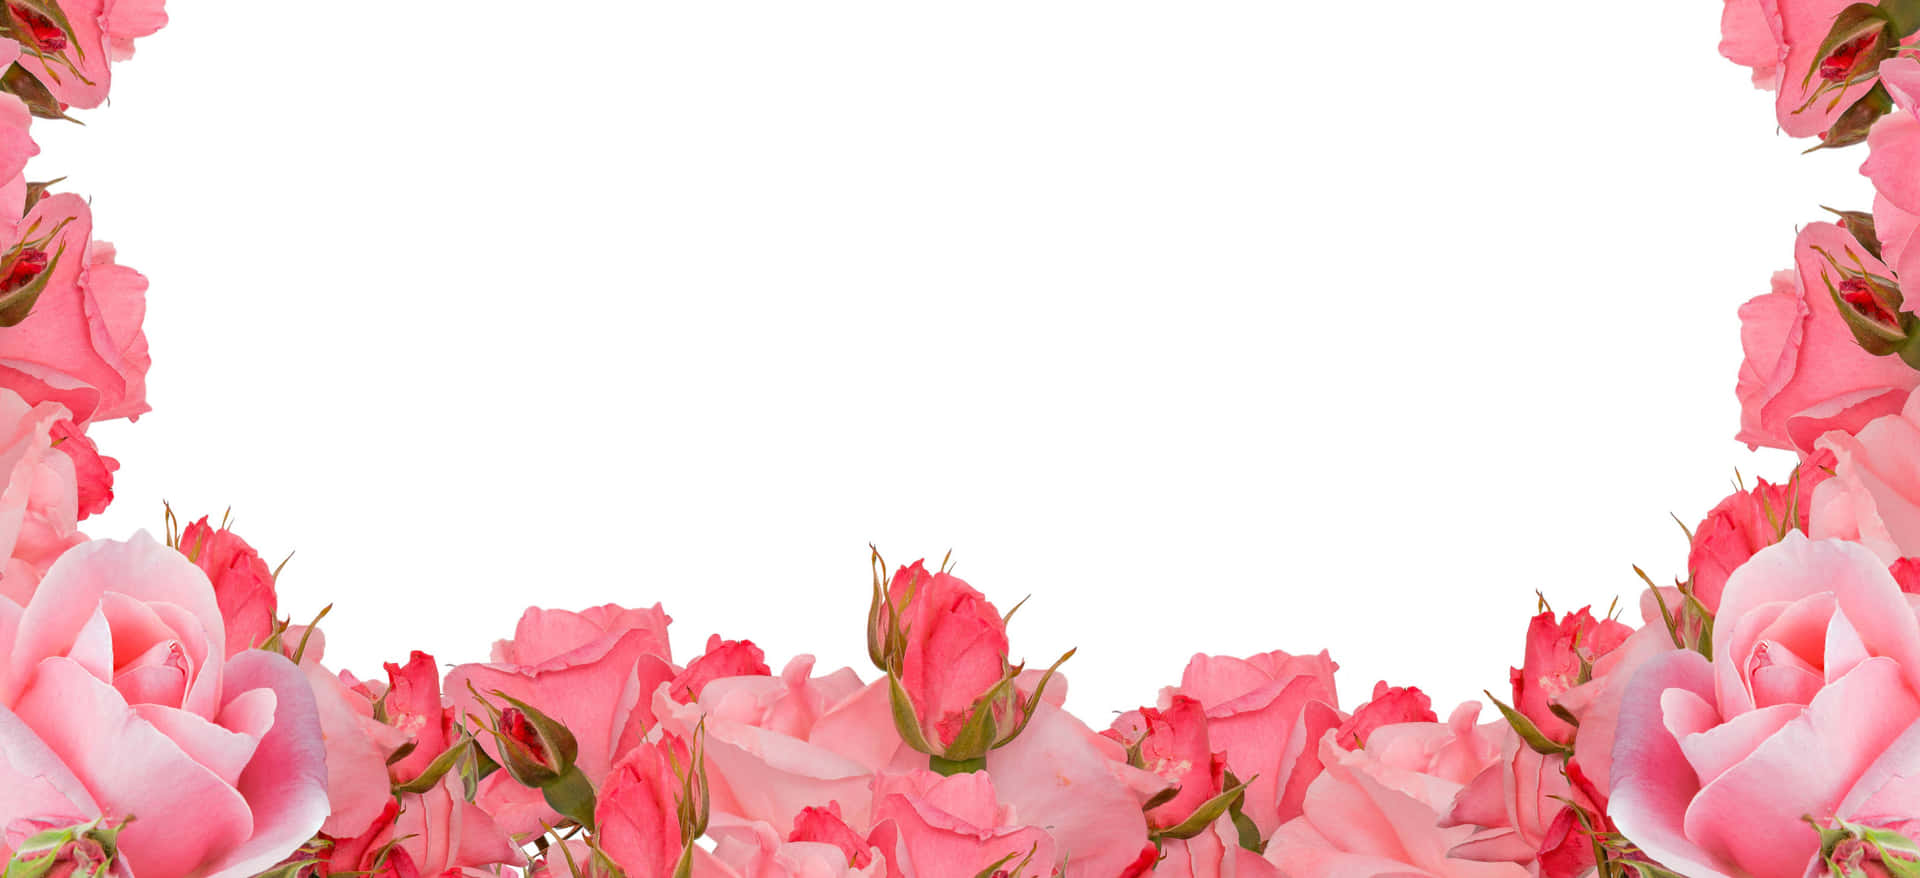 Pink Roses In A Frame With A White Background Wallpaper